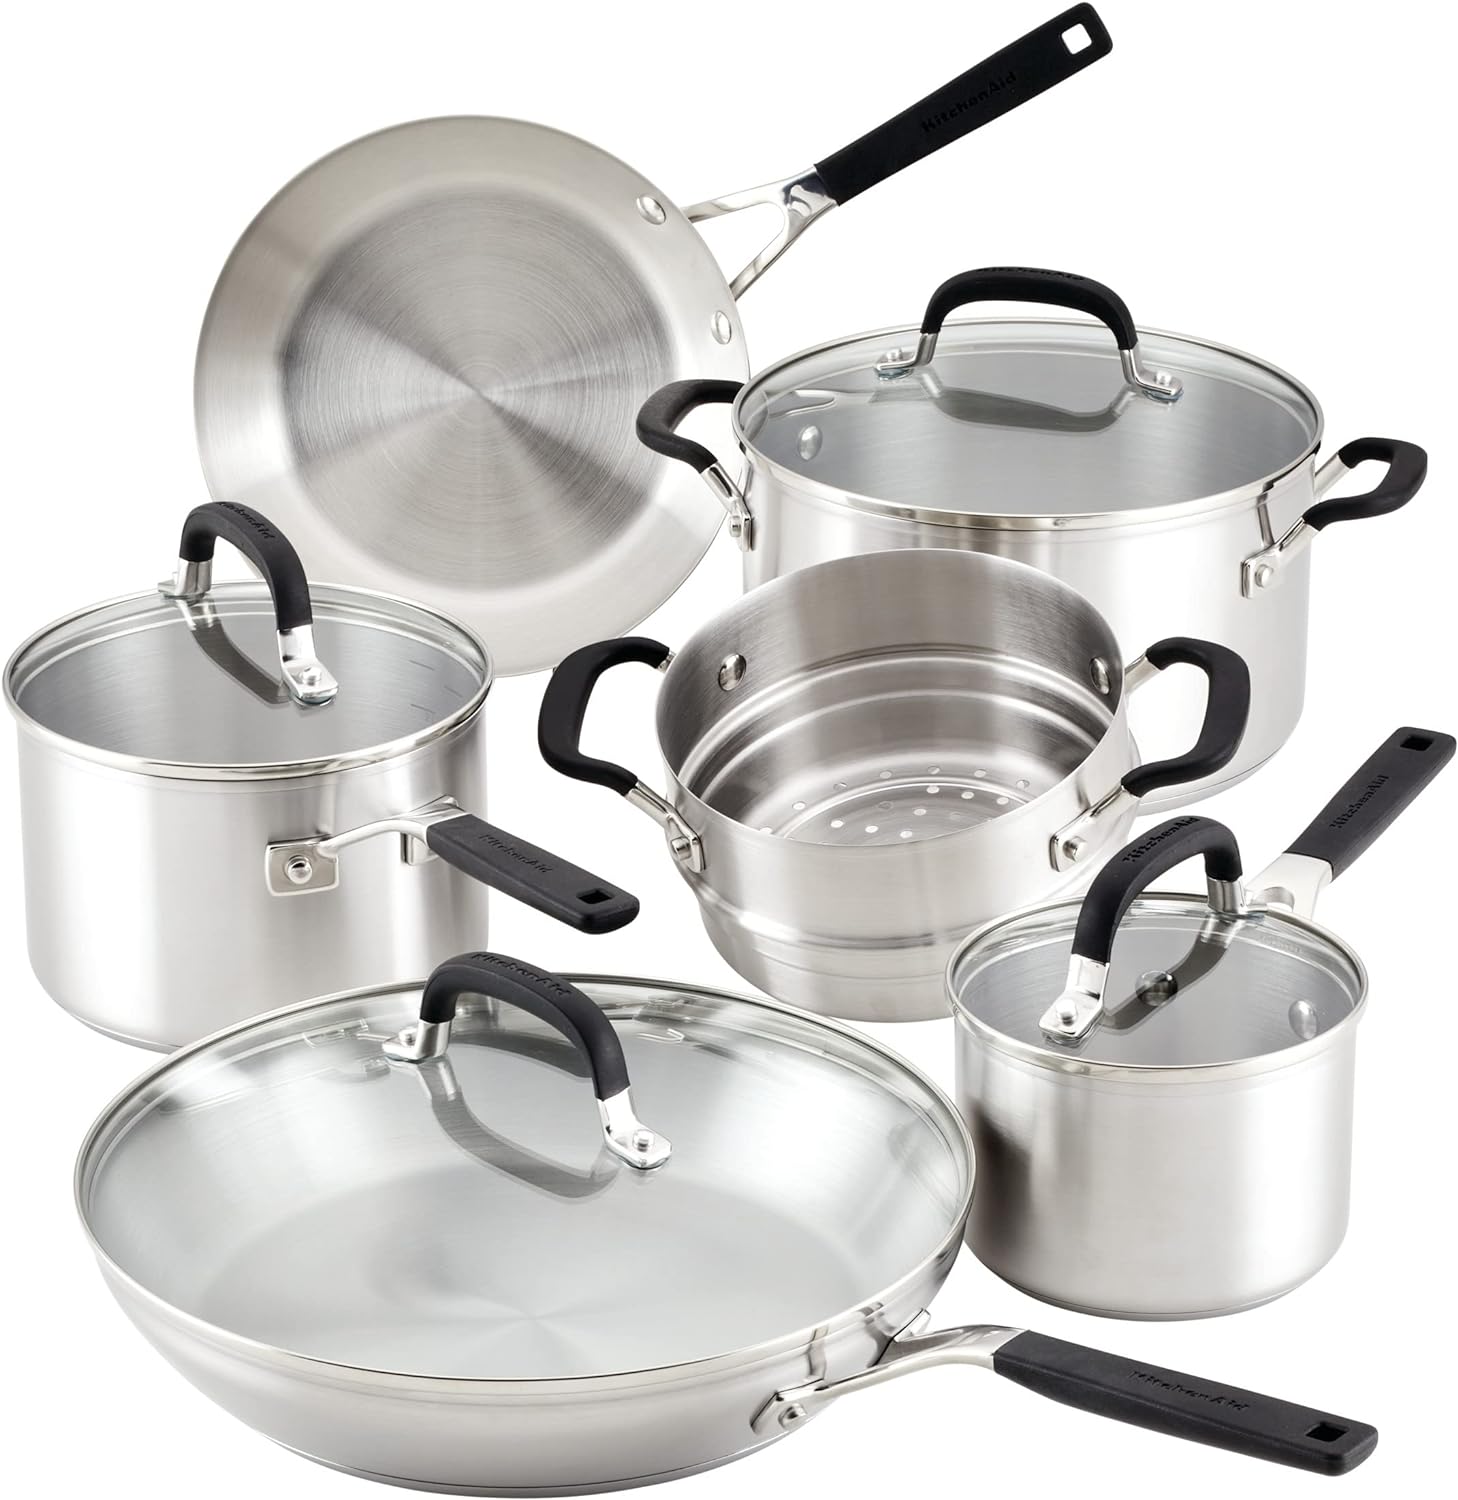 https://bigbigmart.com/wp-content/uploads/2023/12/KitchenAid-Stainless-Steel-Cookware-Pots-and-Pans-Set-10-Piece-Brushed-Stainless-Steel2.jpg